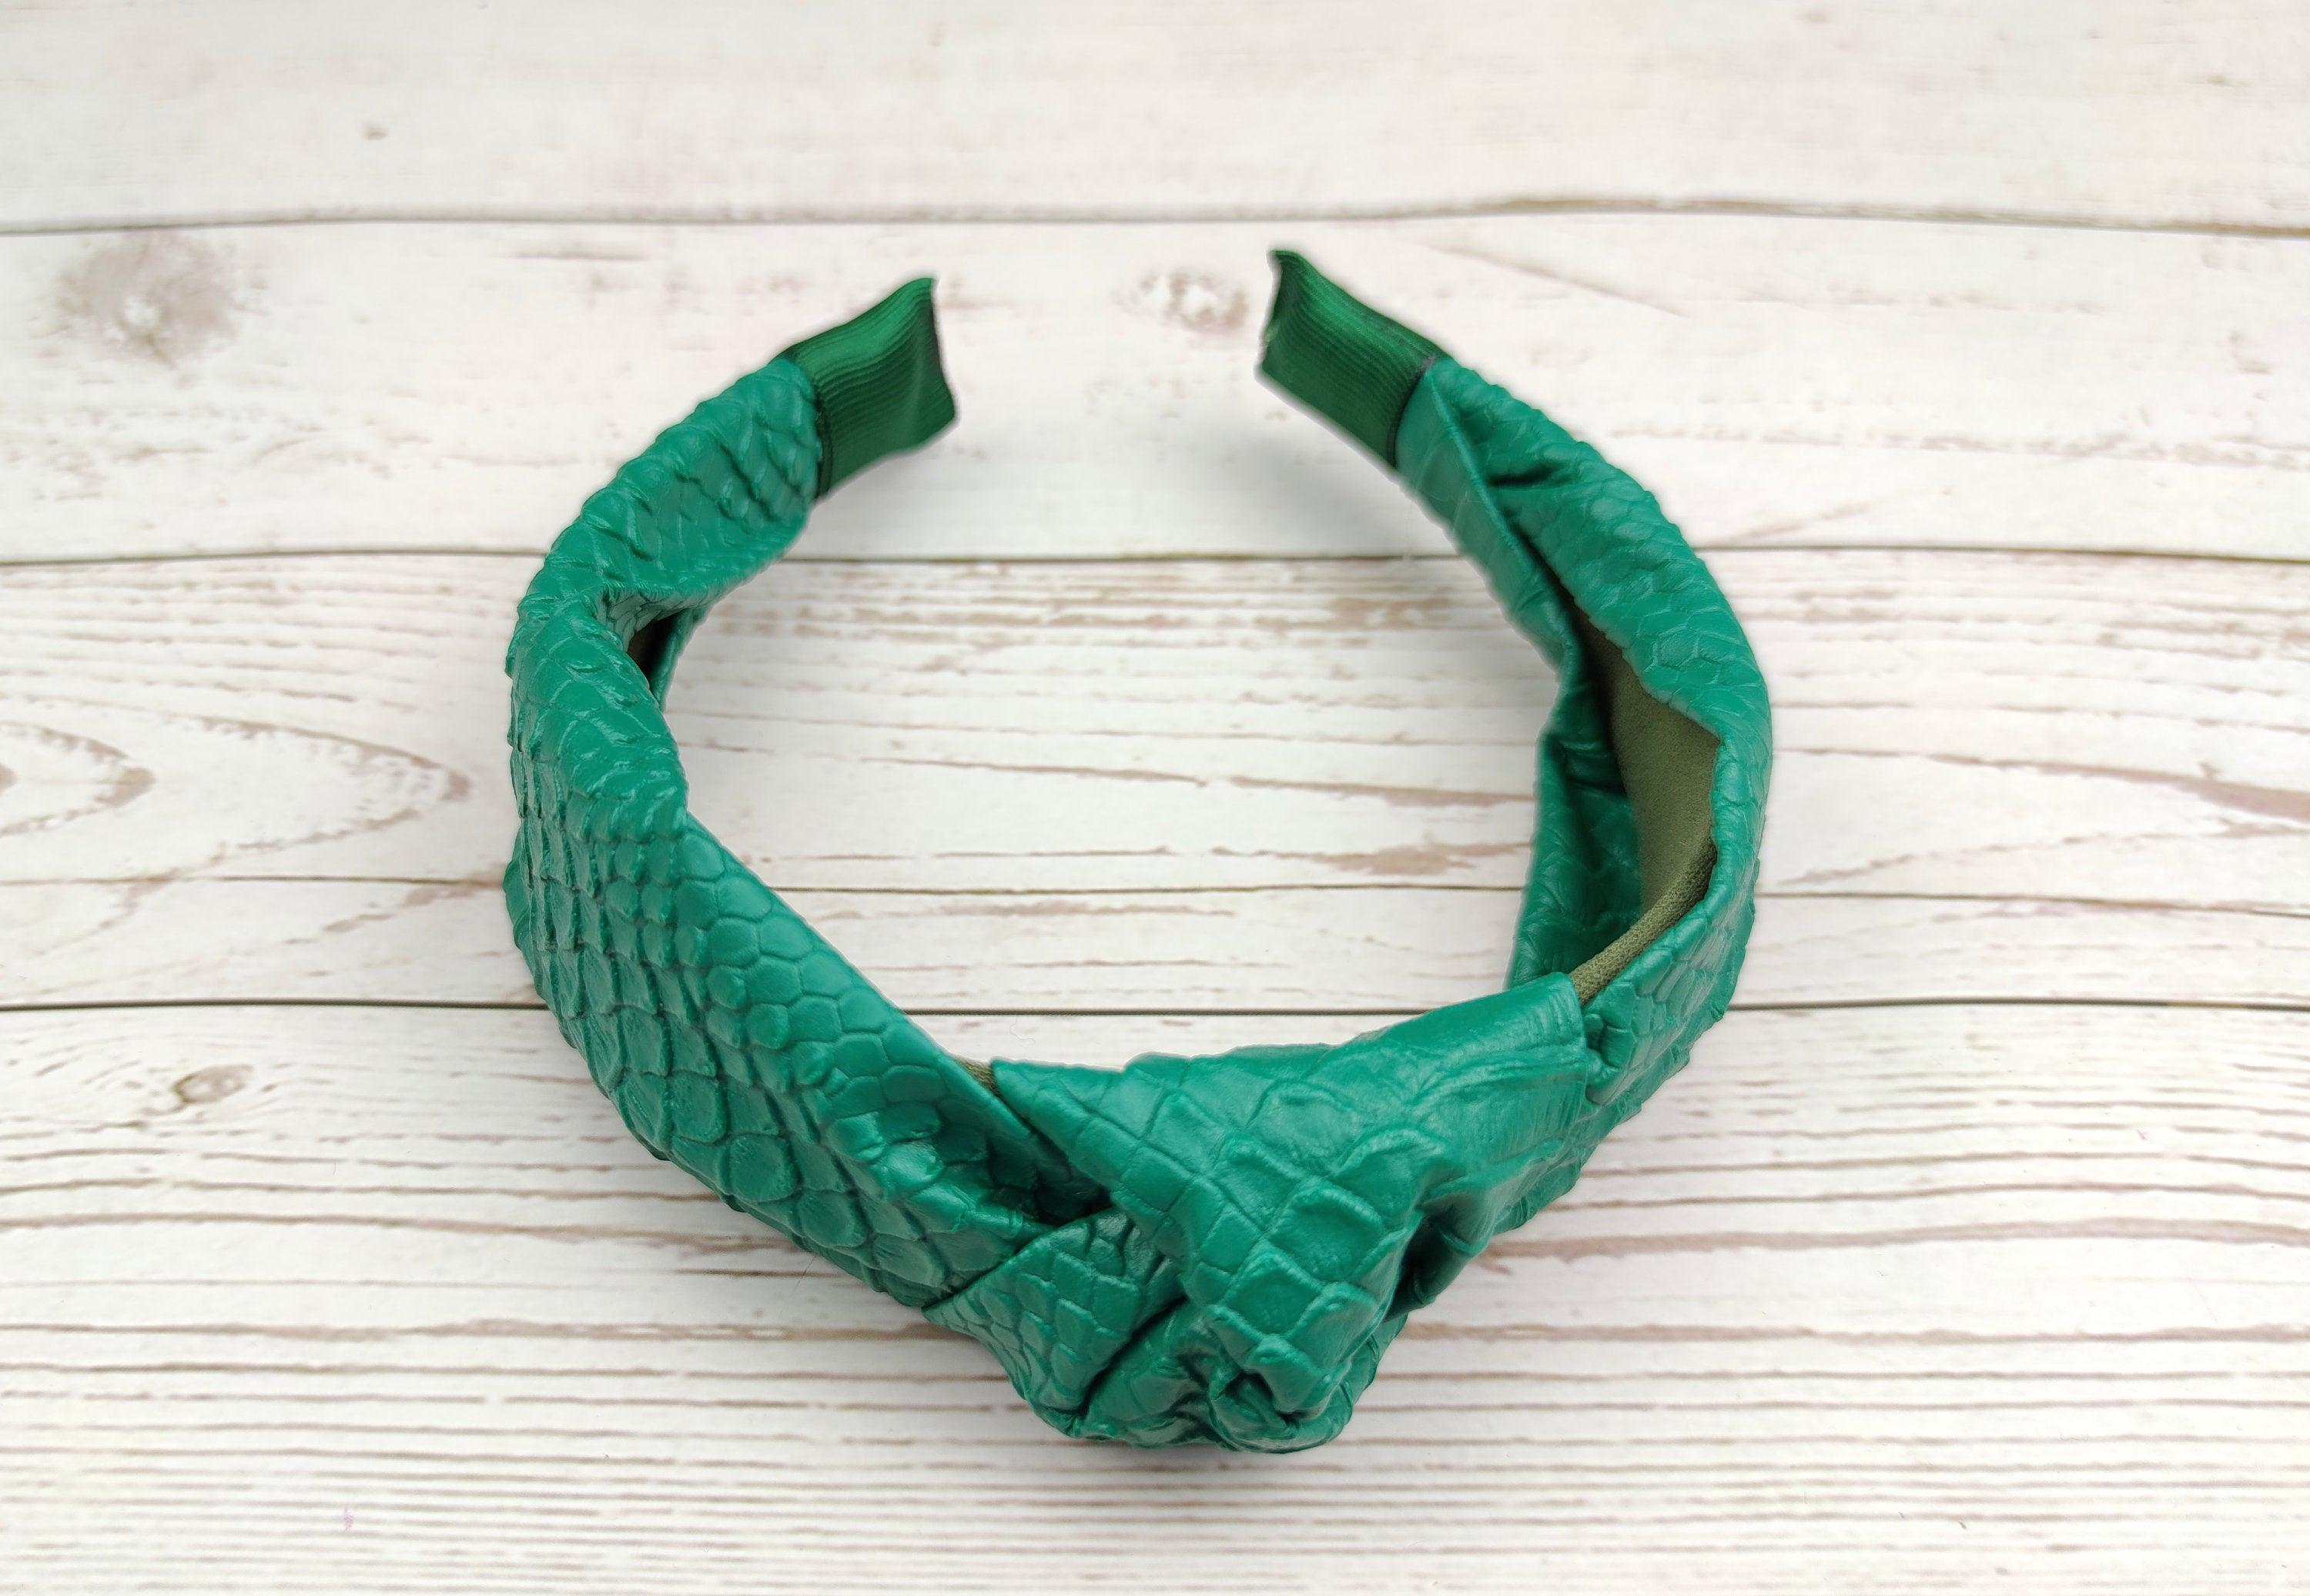 Beautiful Green Faux Leather Twist Headband with Snake Skin Pattern - Stylish and Classic Women's Hairband available at Moyoni Design